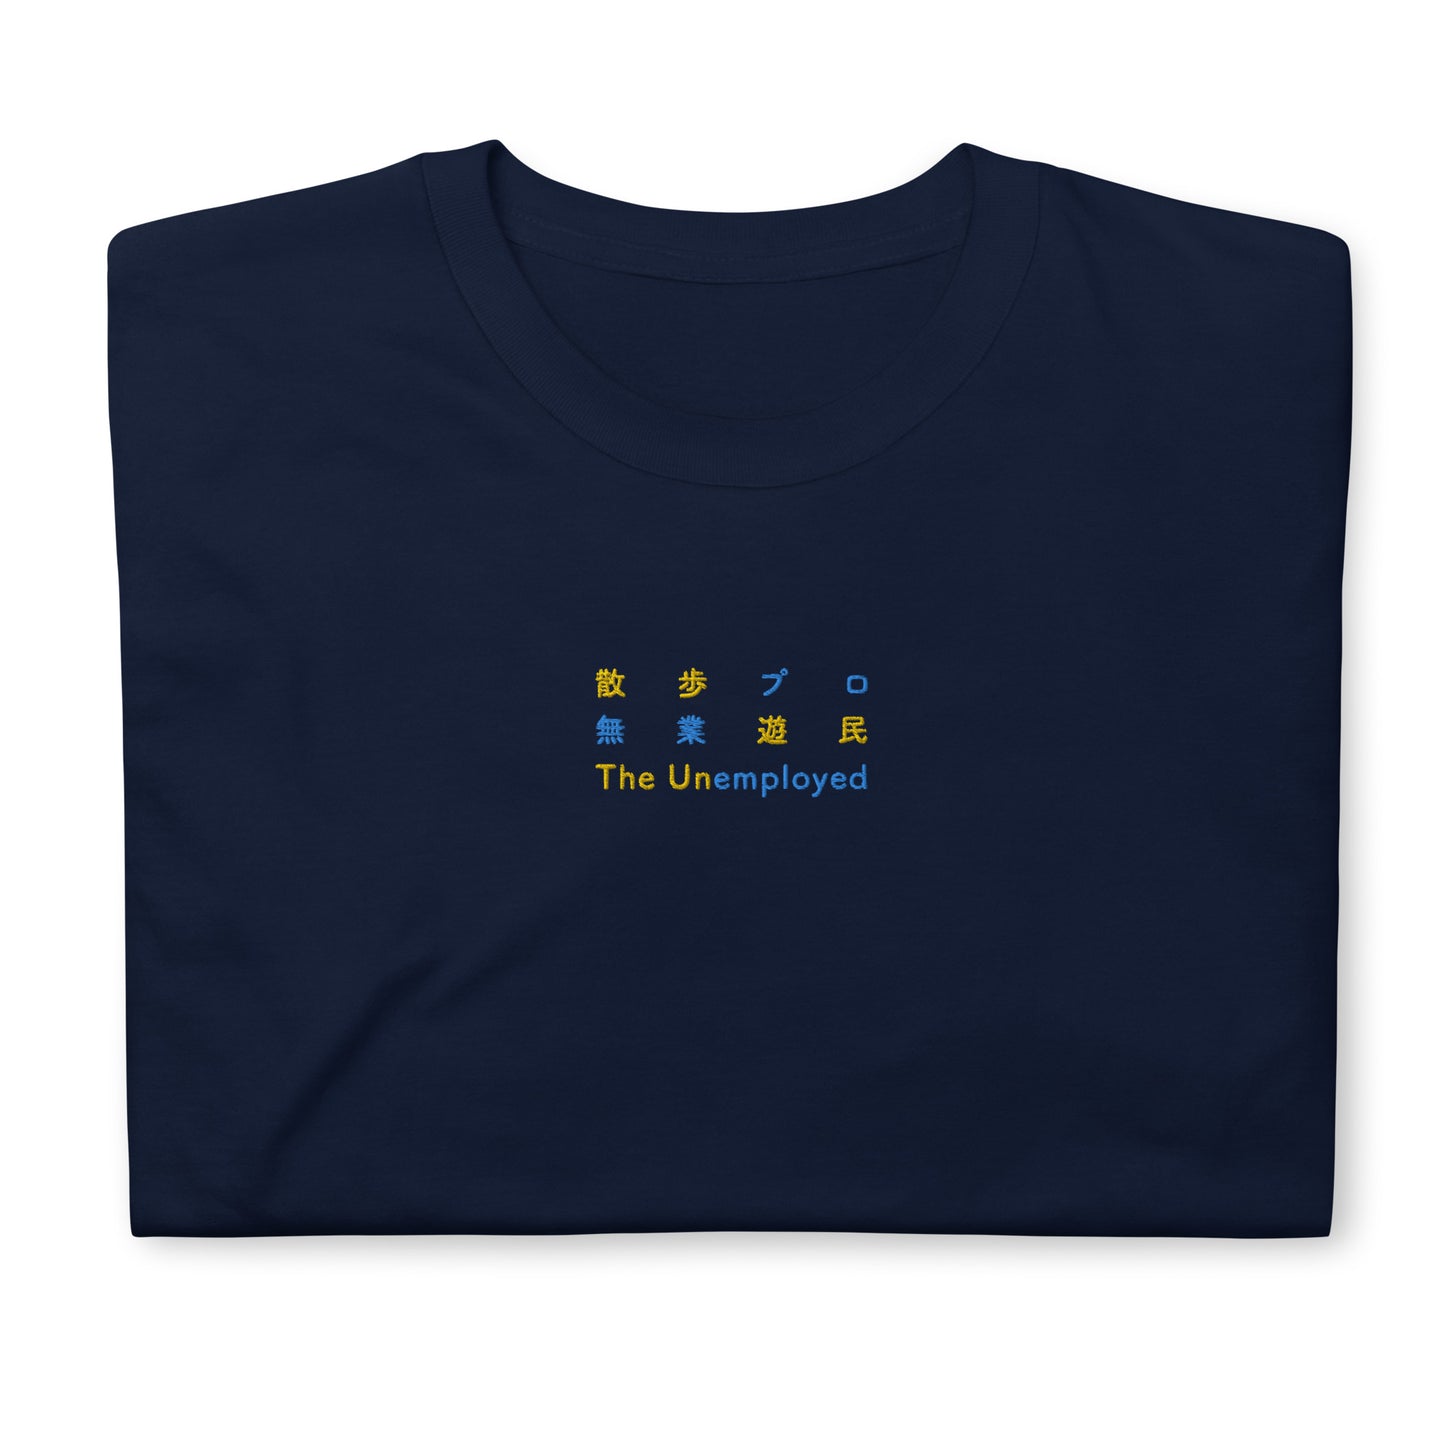 Navy High Quality Tee - Front Design with Yellow/Blue Embroidery "The Unemployed" in three languages